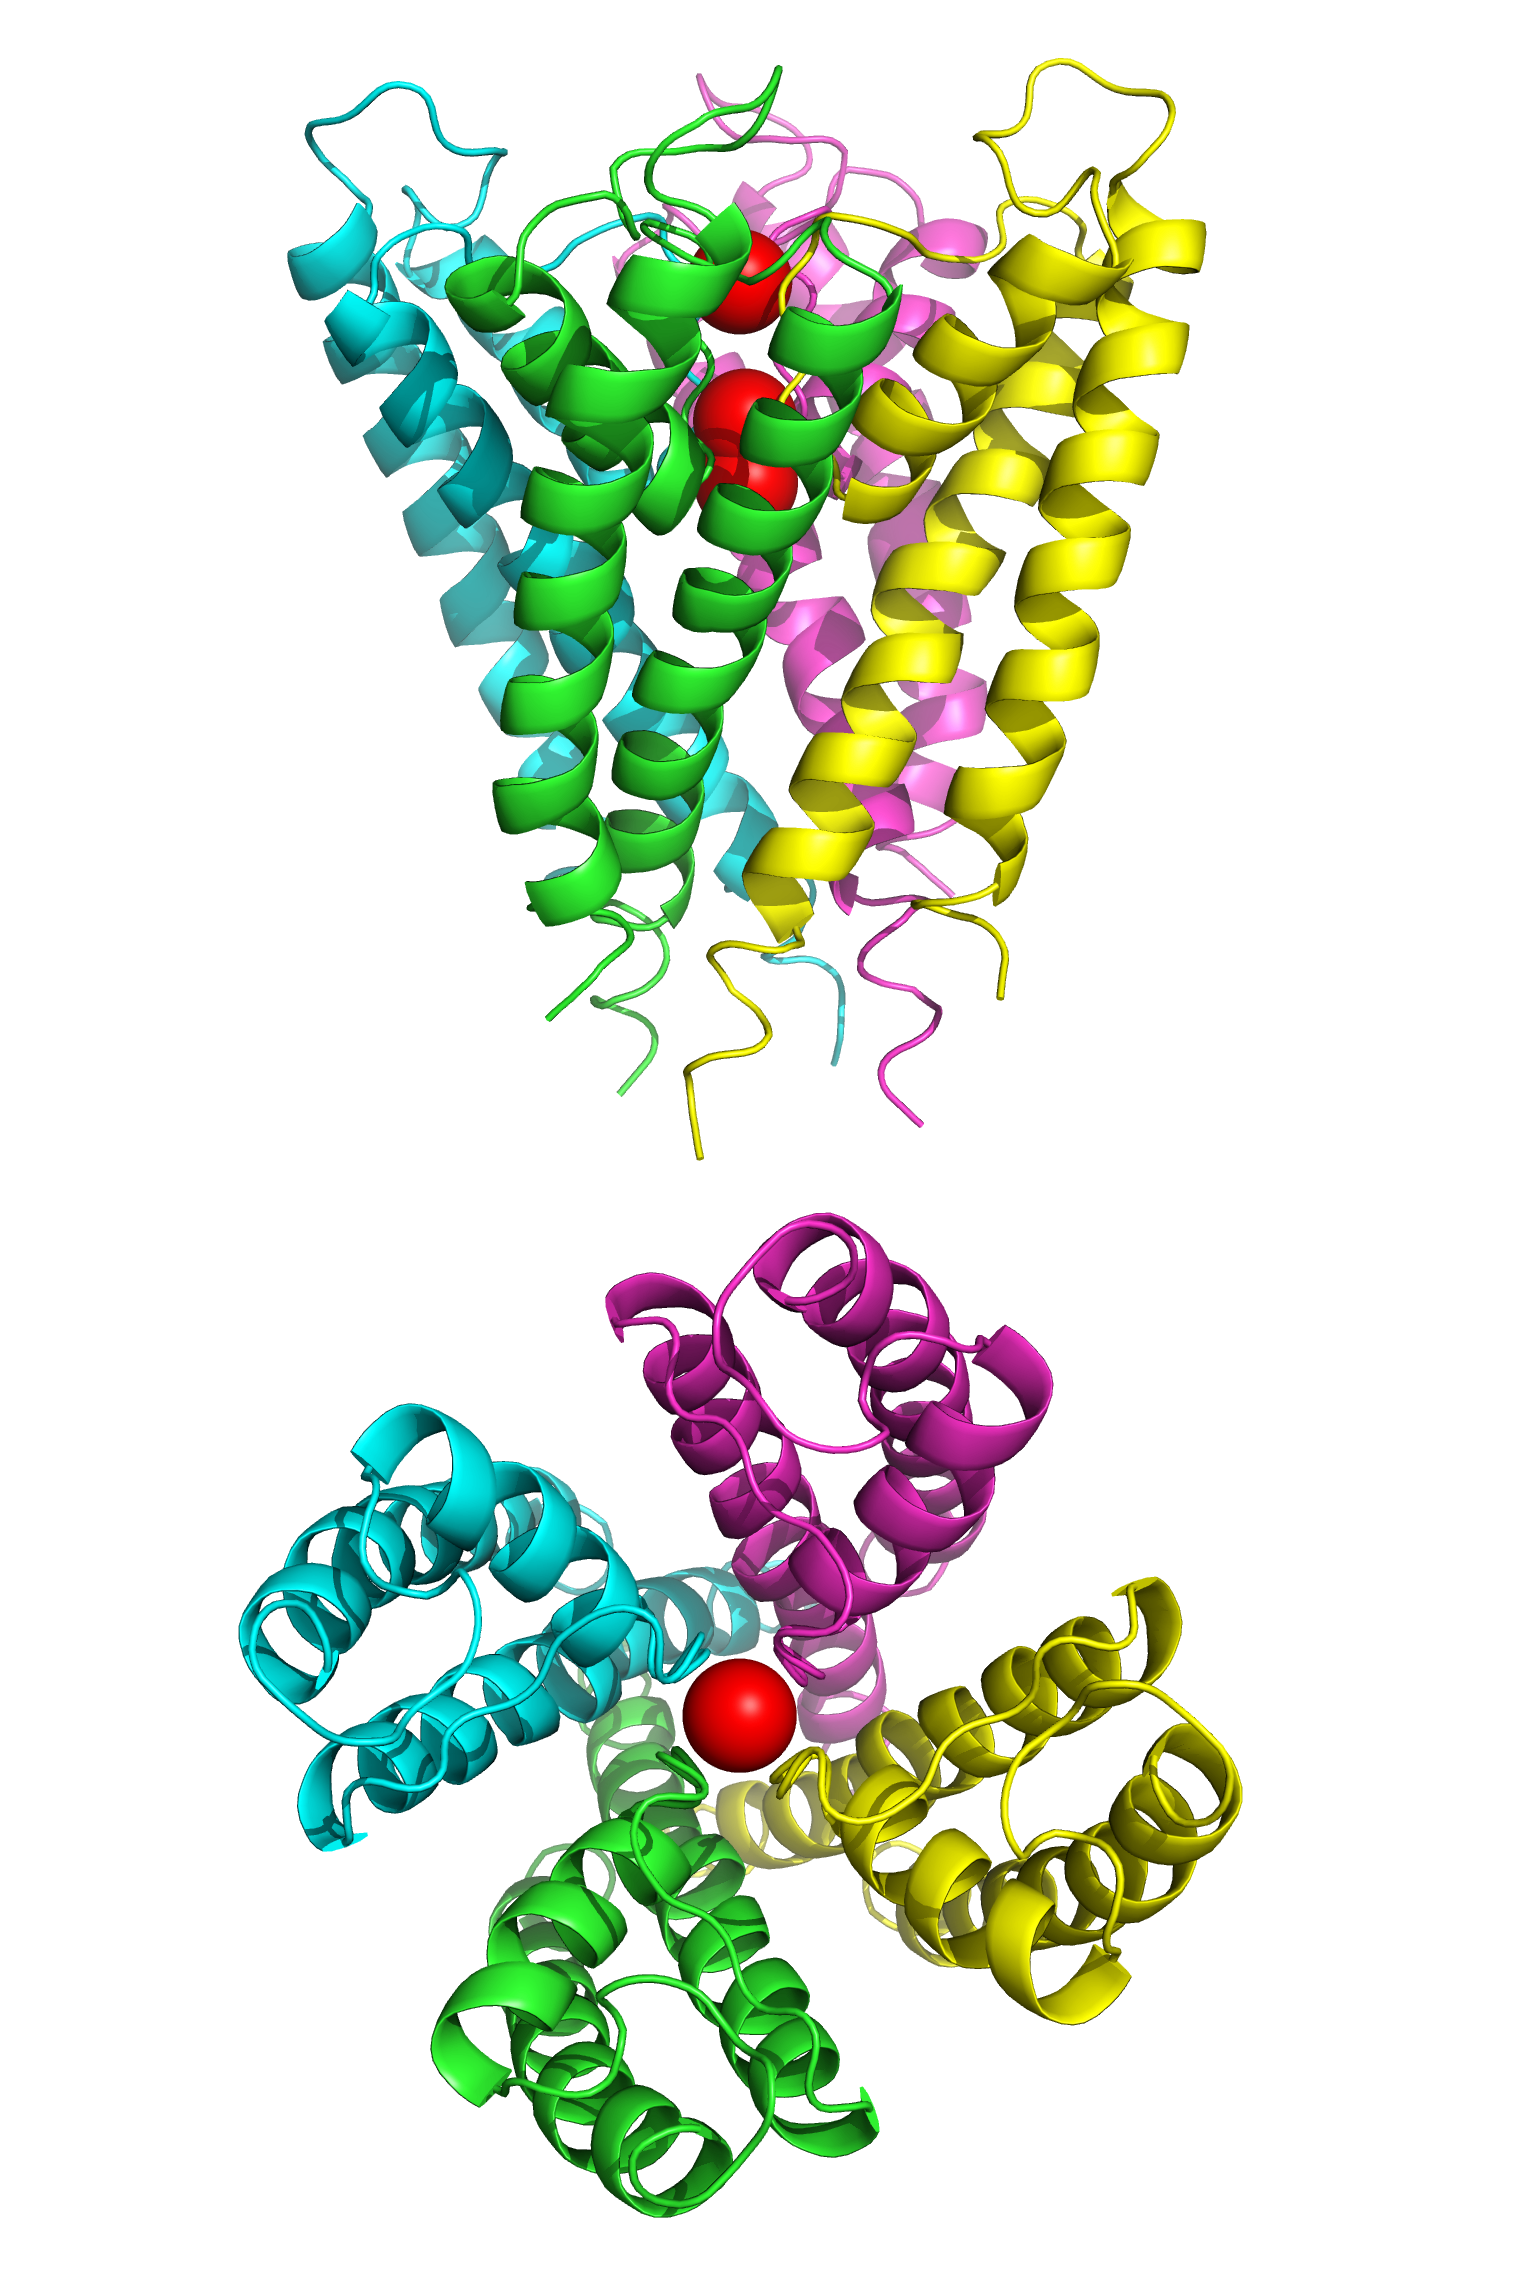 The structure of the potassium channel KcsA fromn Streptomyces lividans determined by X-ray crystallography.Top: side view; bottom: top view. KcsA shares sequence similarity with all known K+ channels and was the first ion channel to have its structure solved at atomic resolution. It consists of four identical subunits that together form a cone shaped structure (top) with a ion selectivity filter at its outer end. Three K+ ions (red spheres) are present in the channel, two of which are held 7.5 angstroms apart by the selectivity filter, a third K+ ion shown in the channel pore below. Data from PDB 1BL8, rendered with open source molecular visualization tool PyMol.